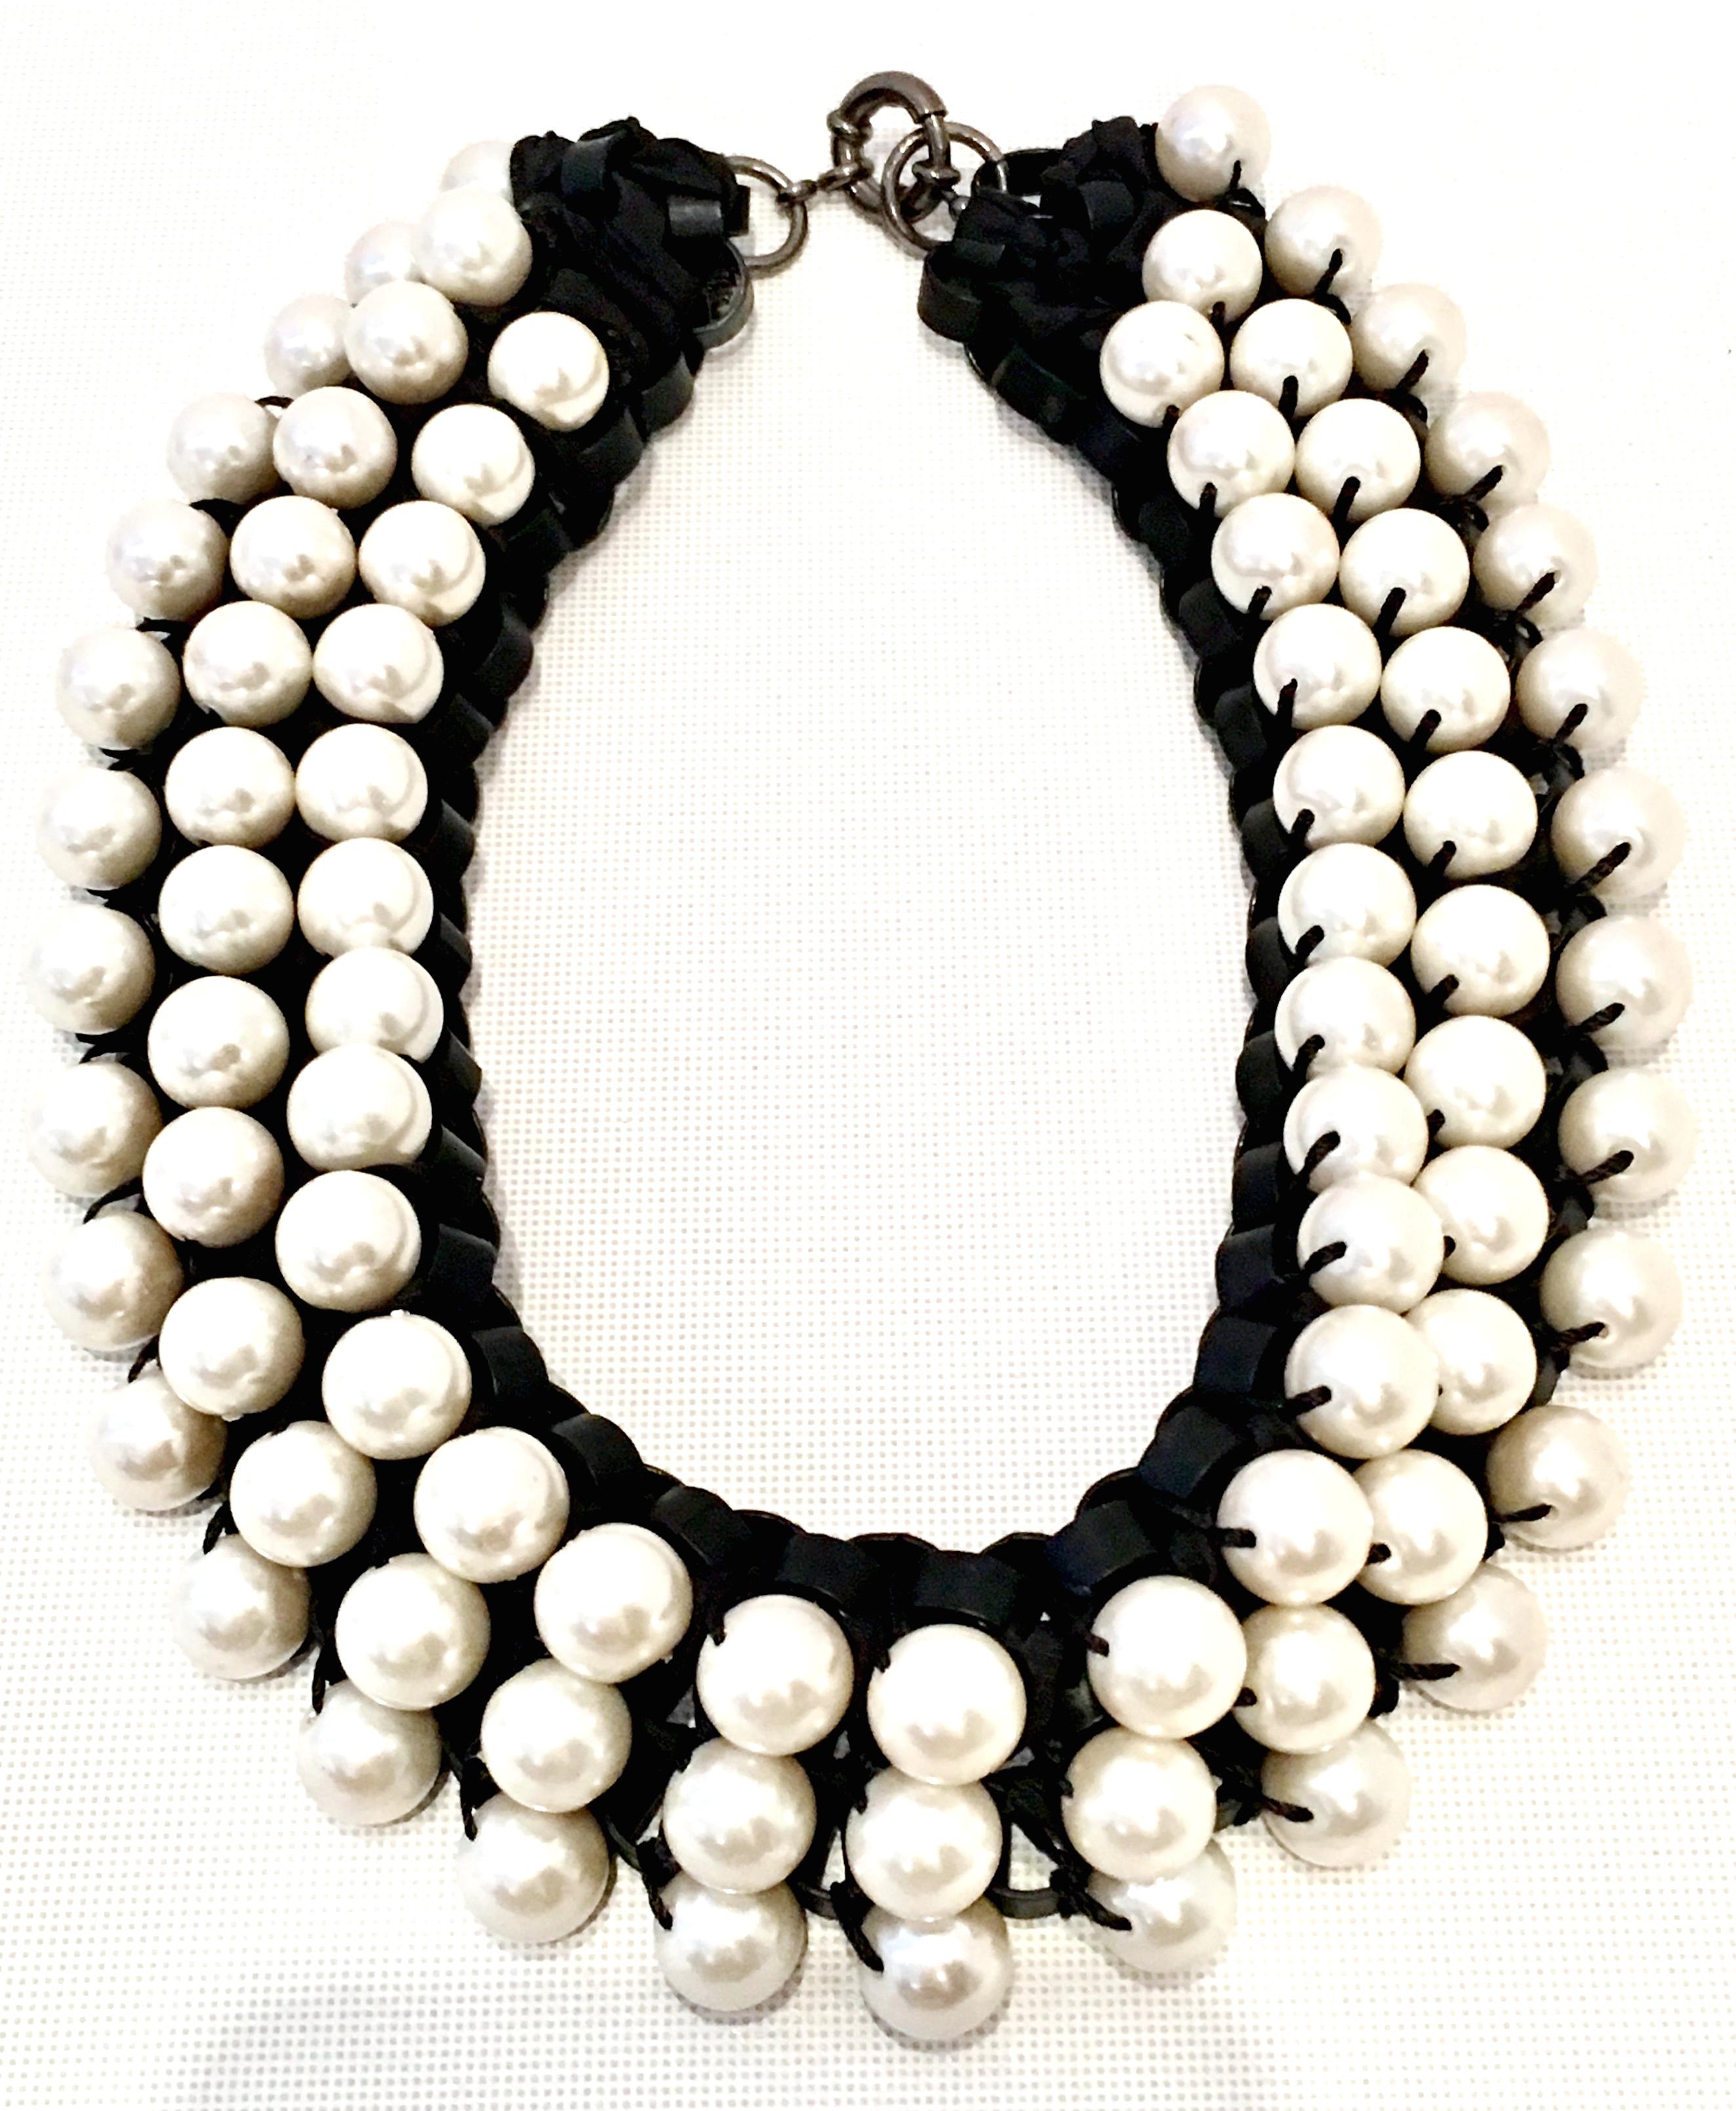 21st Century Leather & Faux Pearl Choker Style Necklace By, Lee Angel Martine. This chunky and substantial piece features woven black leather with a triple row of white faux pearls. The gunmetal tone metal locking claw clasp has a hang tag